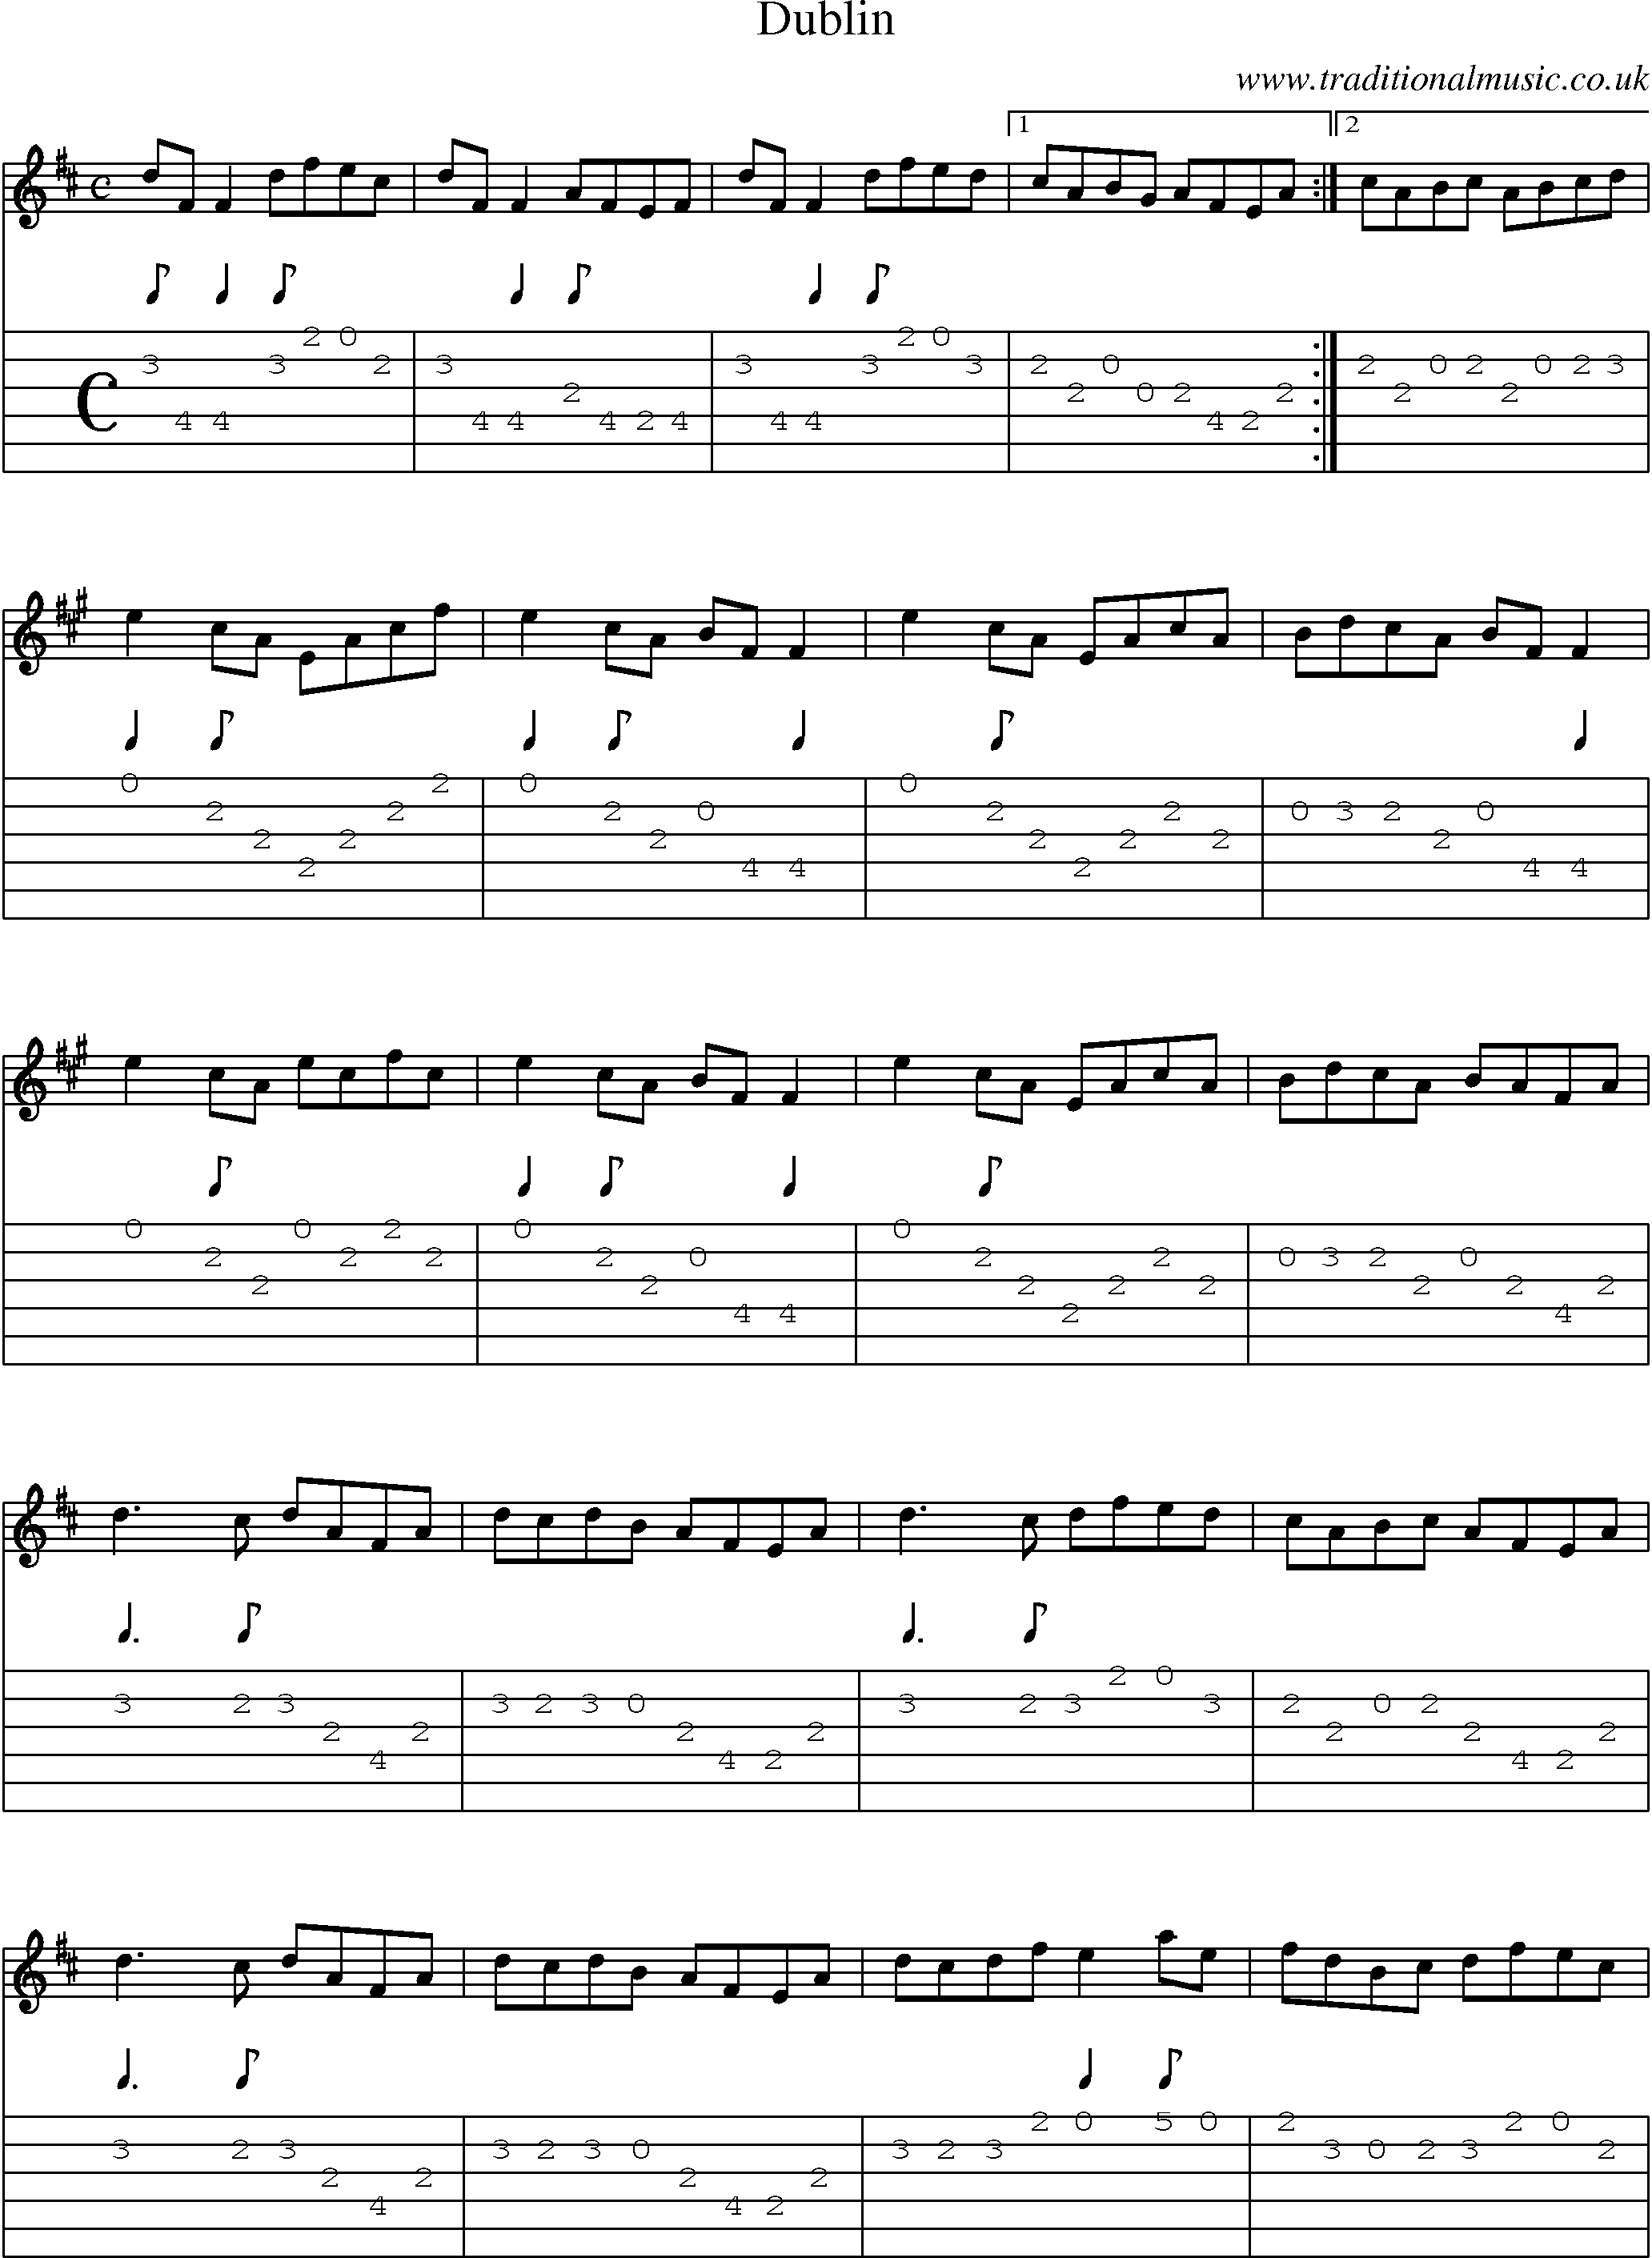 Music Score and Guitar Tabs for Dublin